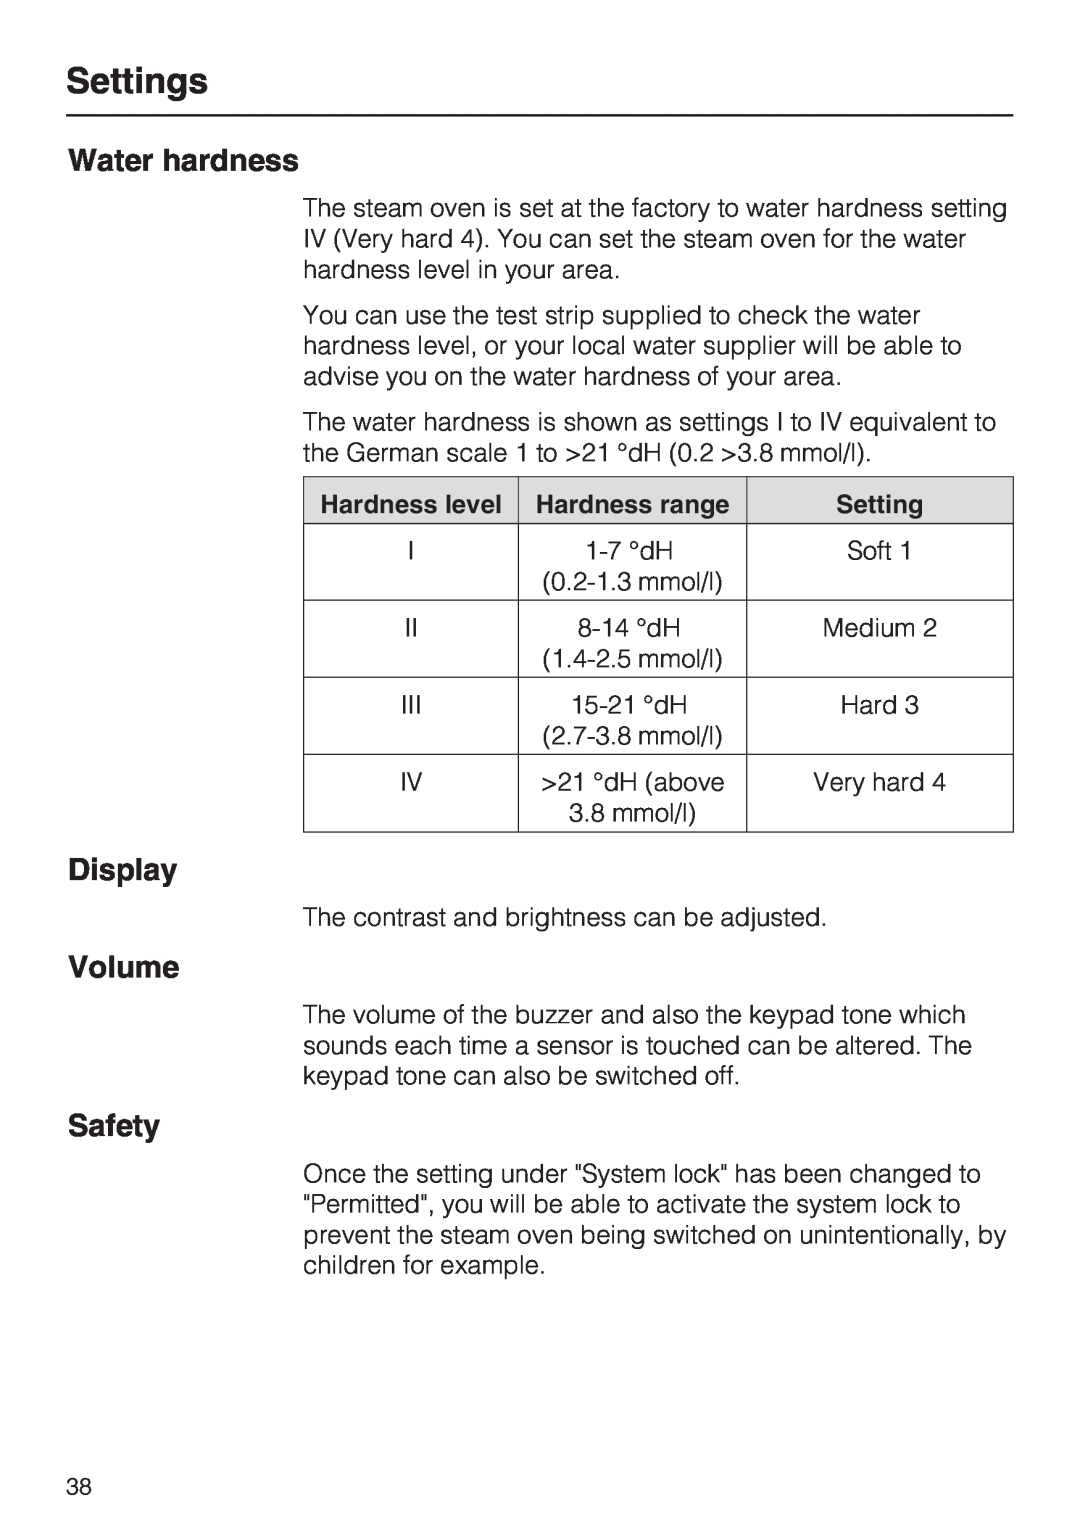 Miele DG 5080, DG 5070, DG 5088 installation instructions Water hardness, Volume, Safety, Settings, Display 